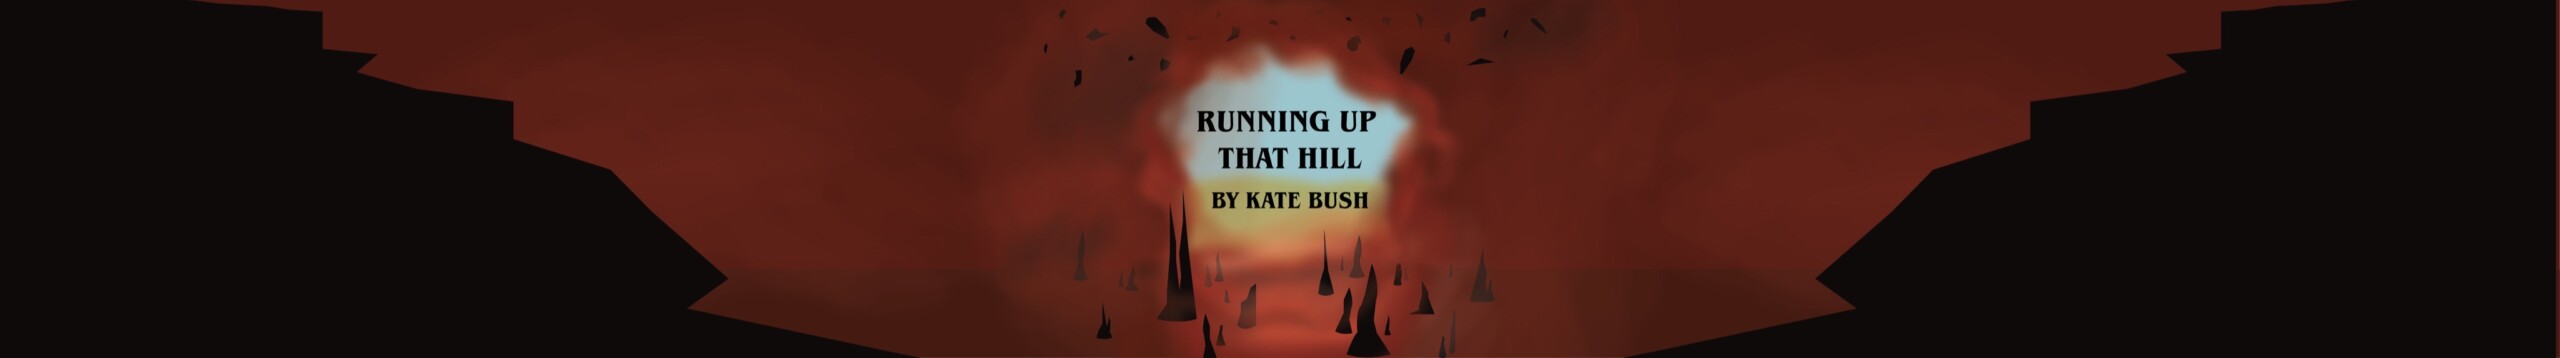 Pick of the Week: Kate Bush "Running Up That Hill"